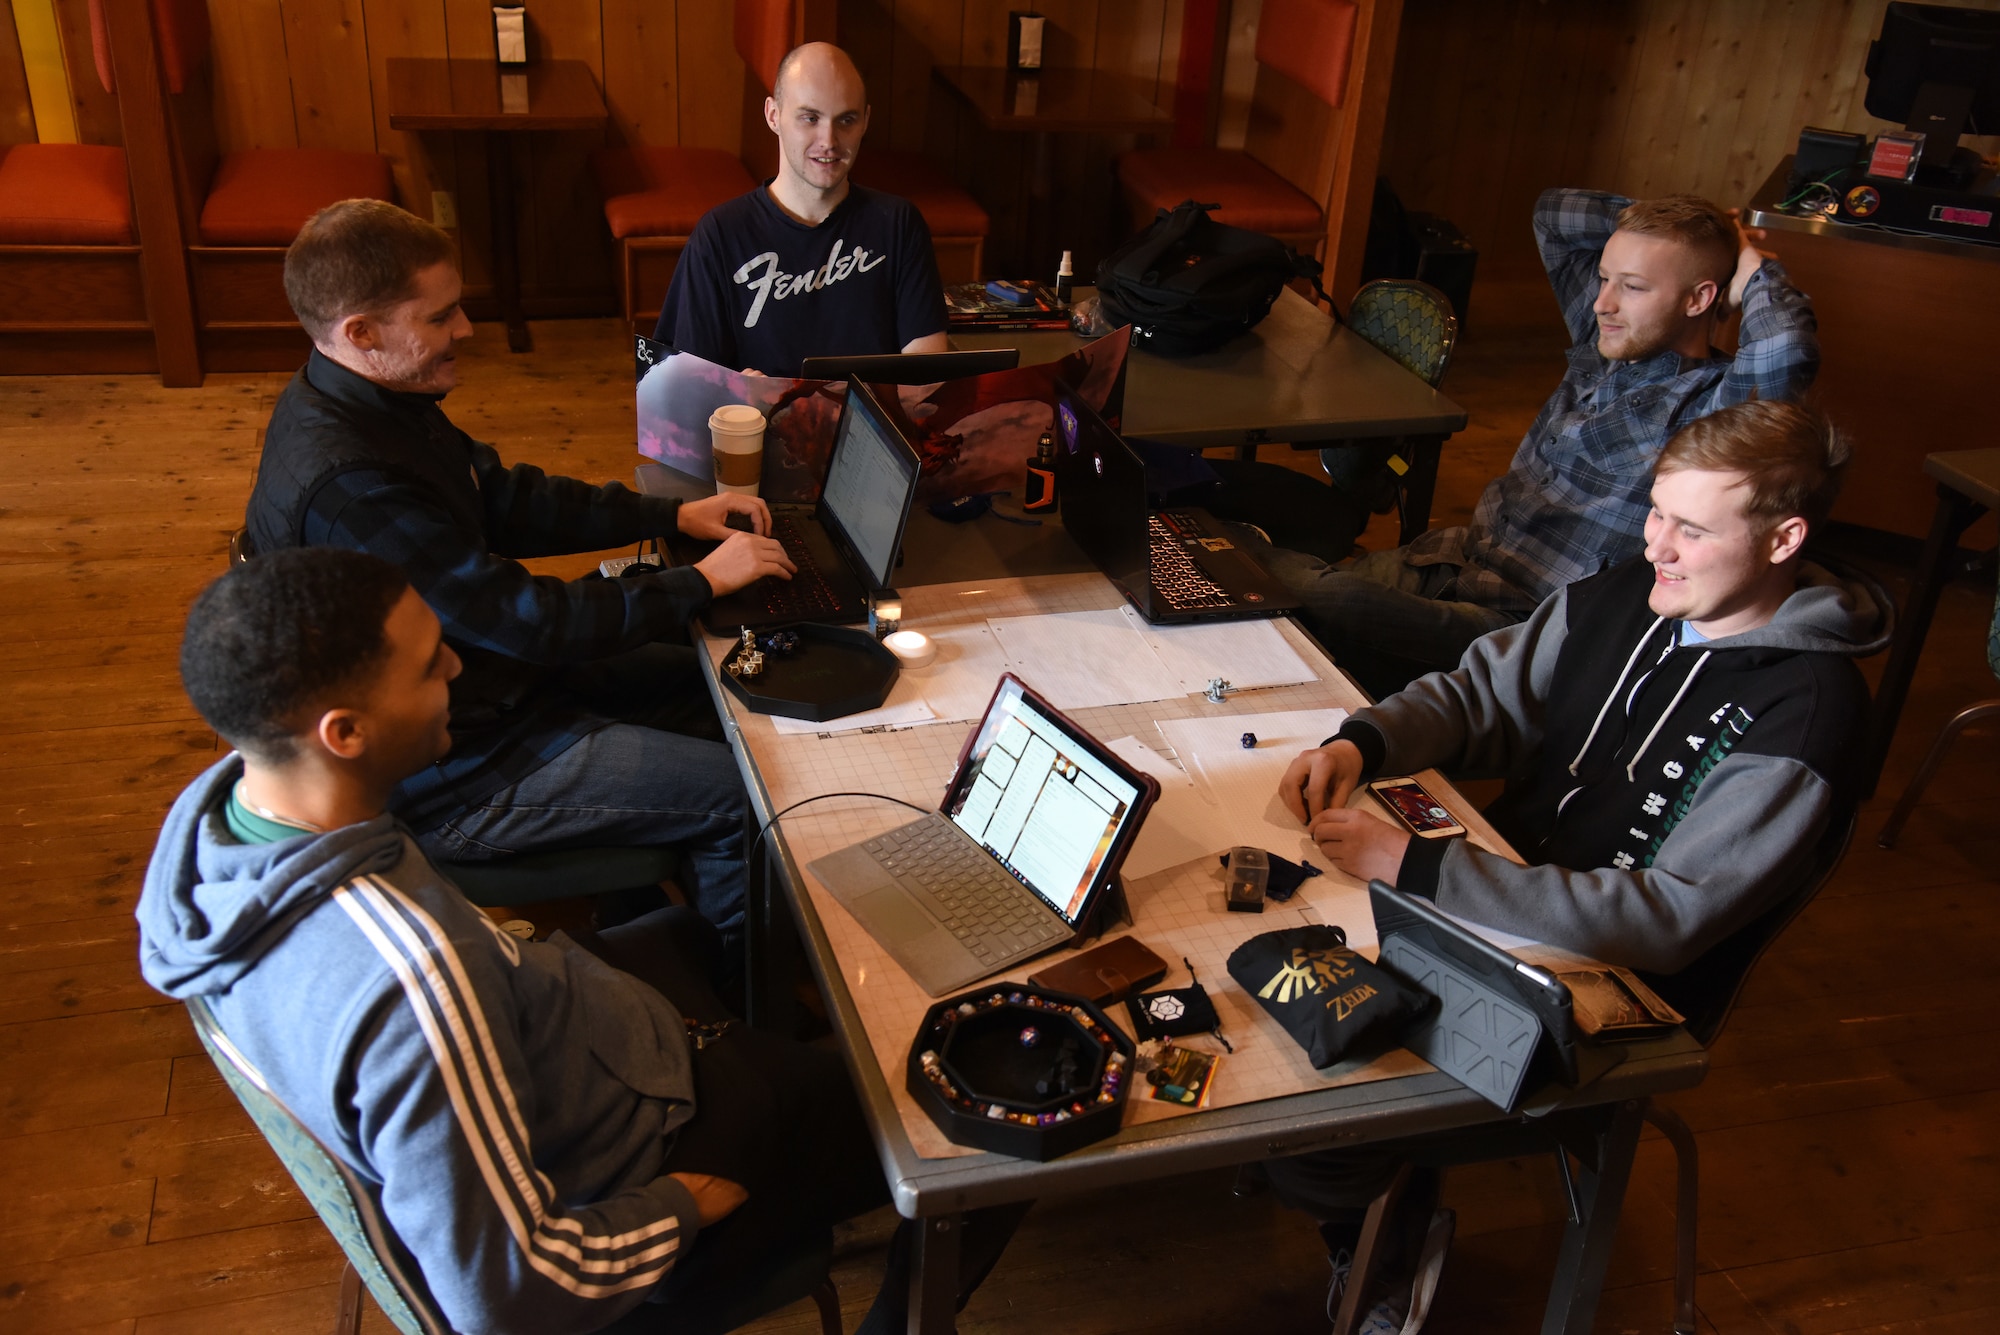 U.S. Airmen from the 35th Fighter Wing, Misawa Air Base, Japan, gather to play a tabletop role-playing game, March 7, 2020.  The Toppers gaming club meets every Saturday at T’s Burritos in the Enlisted Club. The club provided the opportunity for gaming enthusiasts to be a part of a community where Airmen share similar interests in tabletop games. (U.S. Air Force photo by Tech. Sgt. Chris Jacobs)